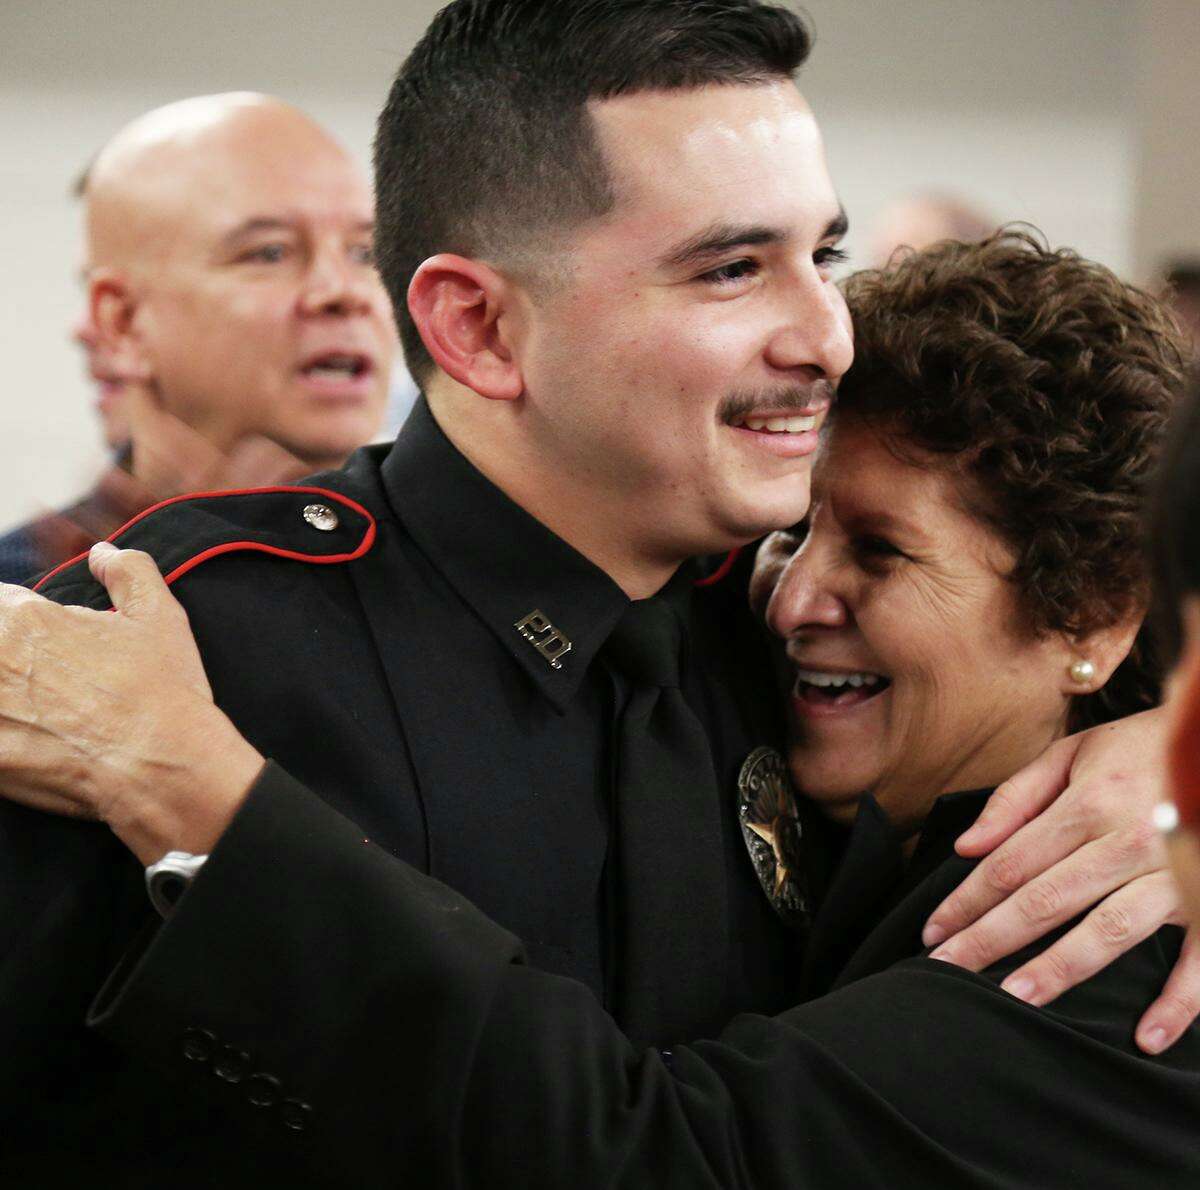 Xavier Leal hugs his grandmother, Pauline Bustamante, Dec. 14 during the 117th Alvin Community College Law Enforcement Academy graduation. Leal was named Top Gun for the highest achievement in firearms training.